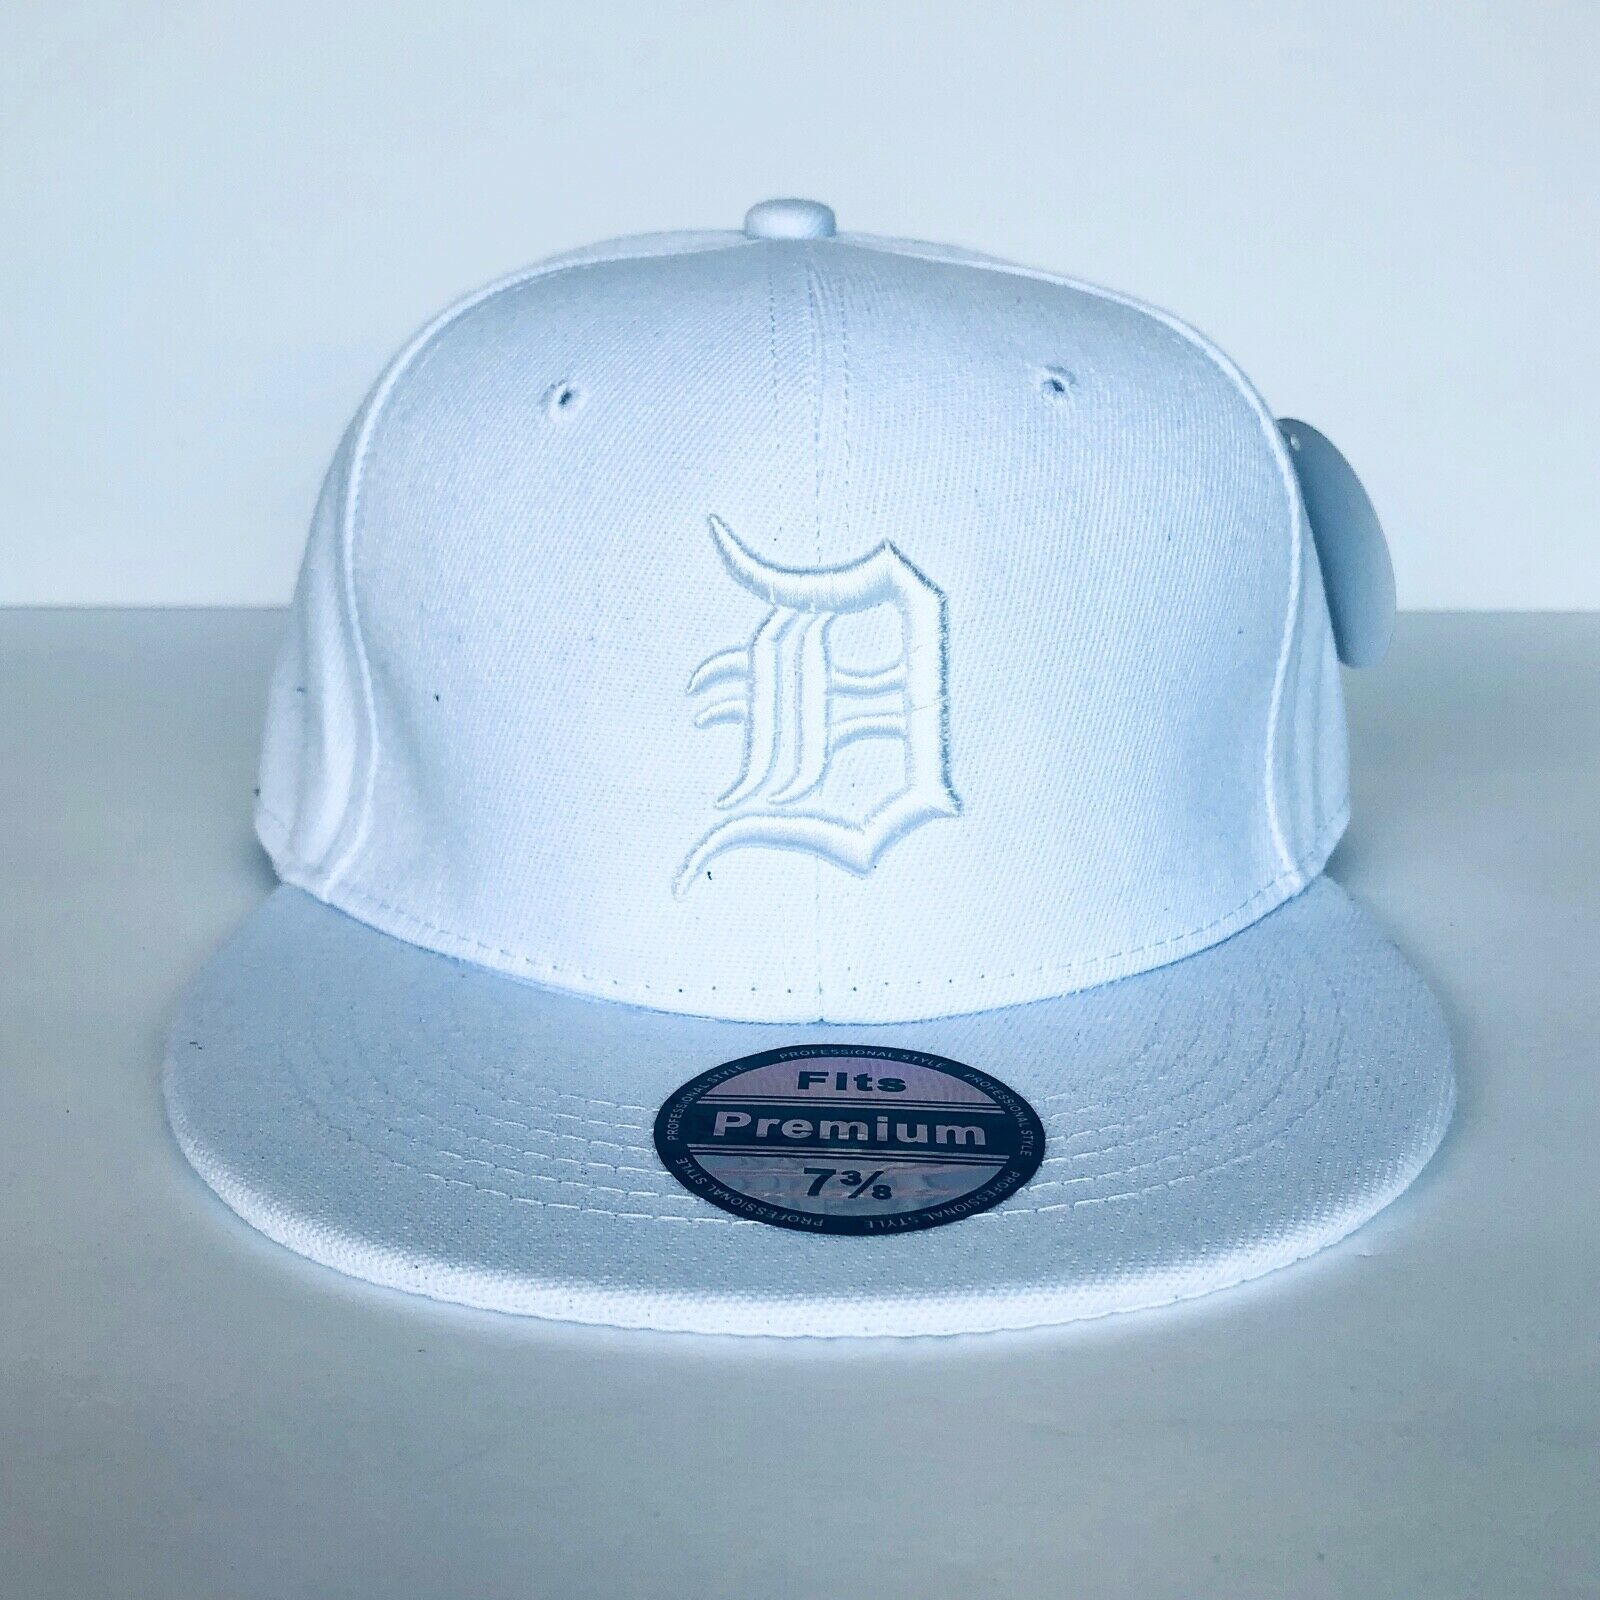 NEW Mens Detroit Tigers Baseball Cap Fitted Hat Multi Size White